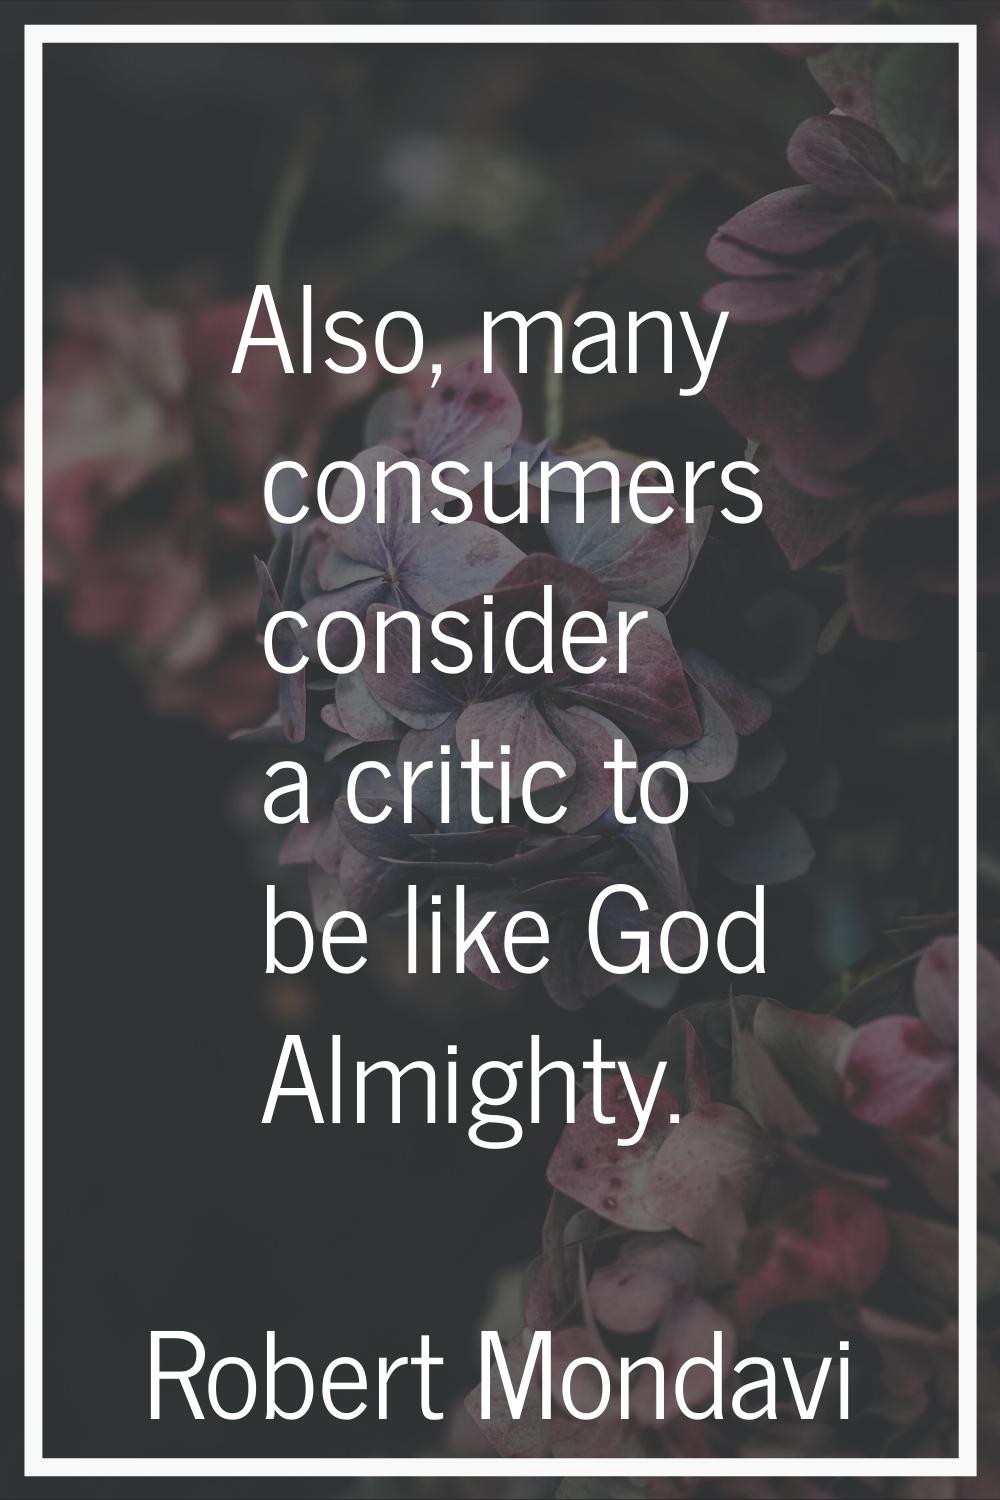 Also, many consumers consider a critic to be like God Almighty.